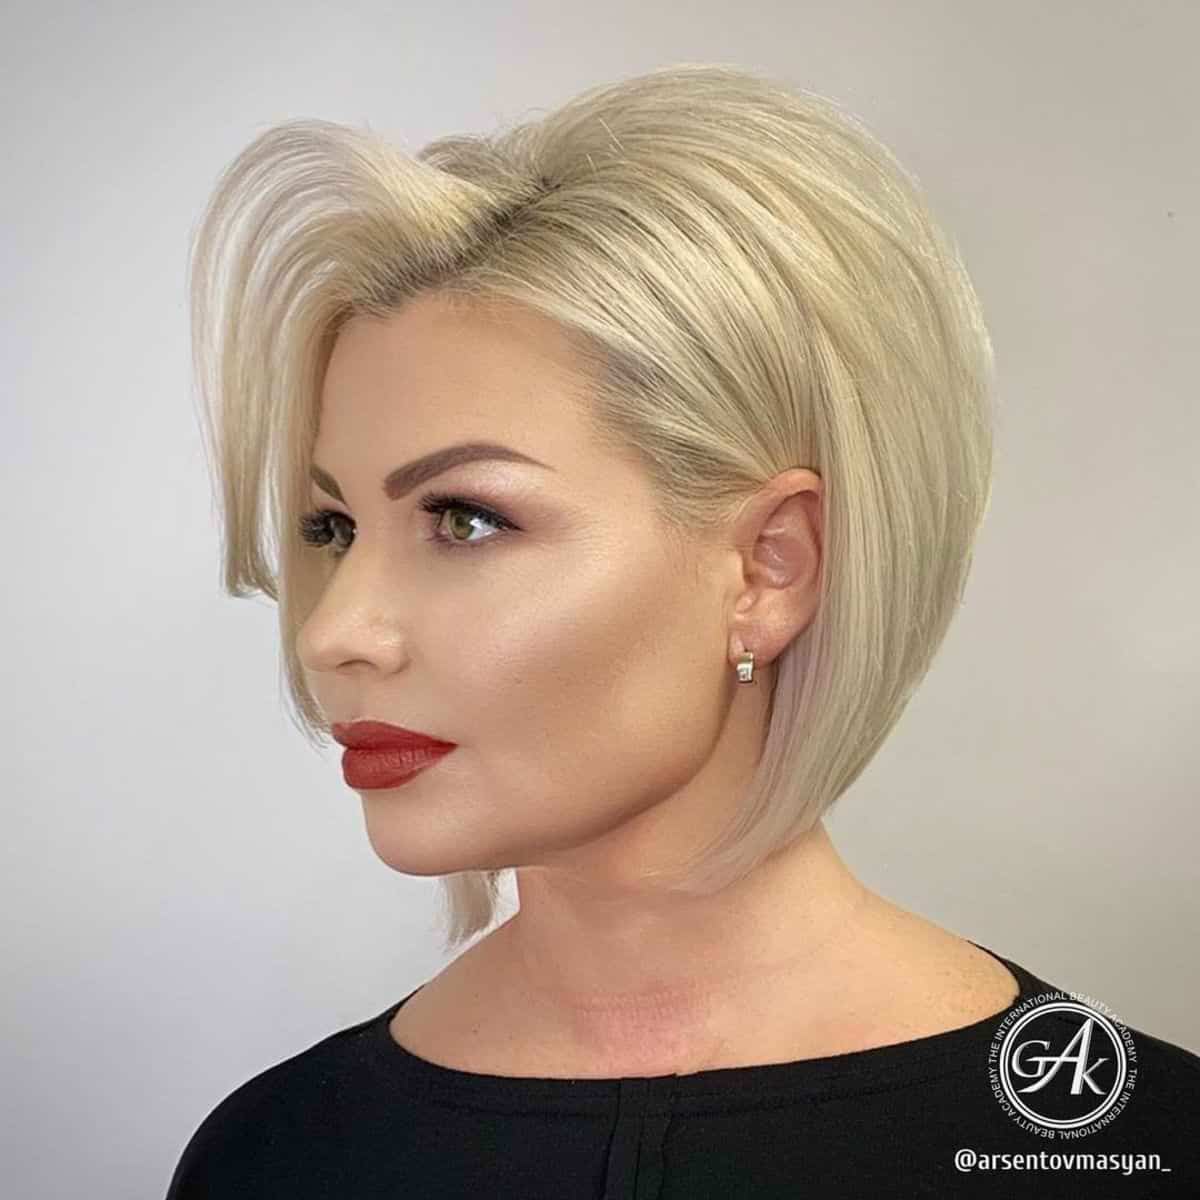 Neck-Length Short Stacked Bob with a Side Part for a Square Face